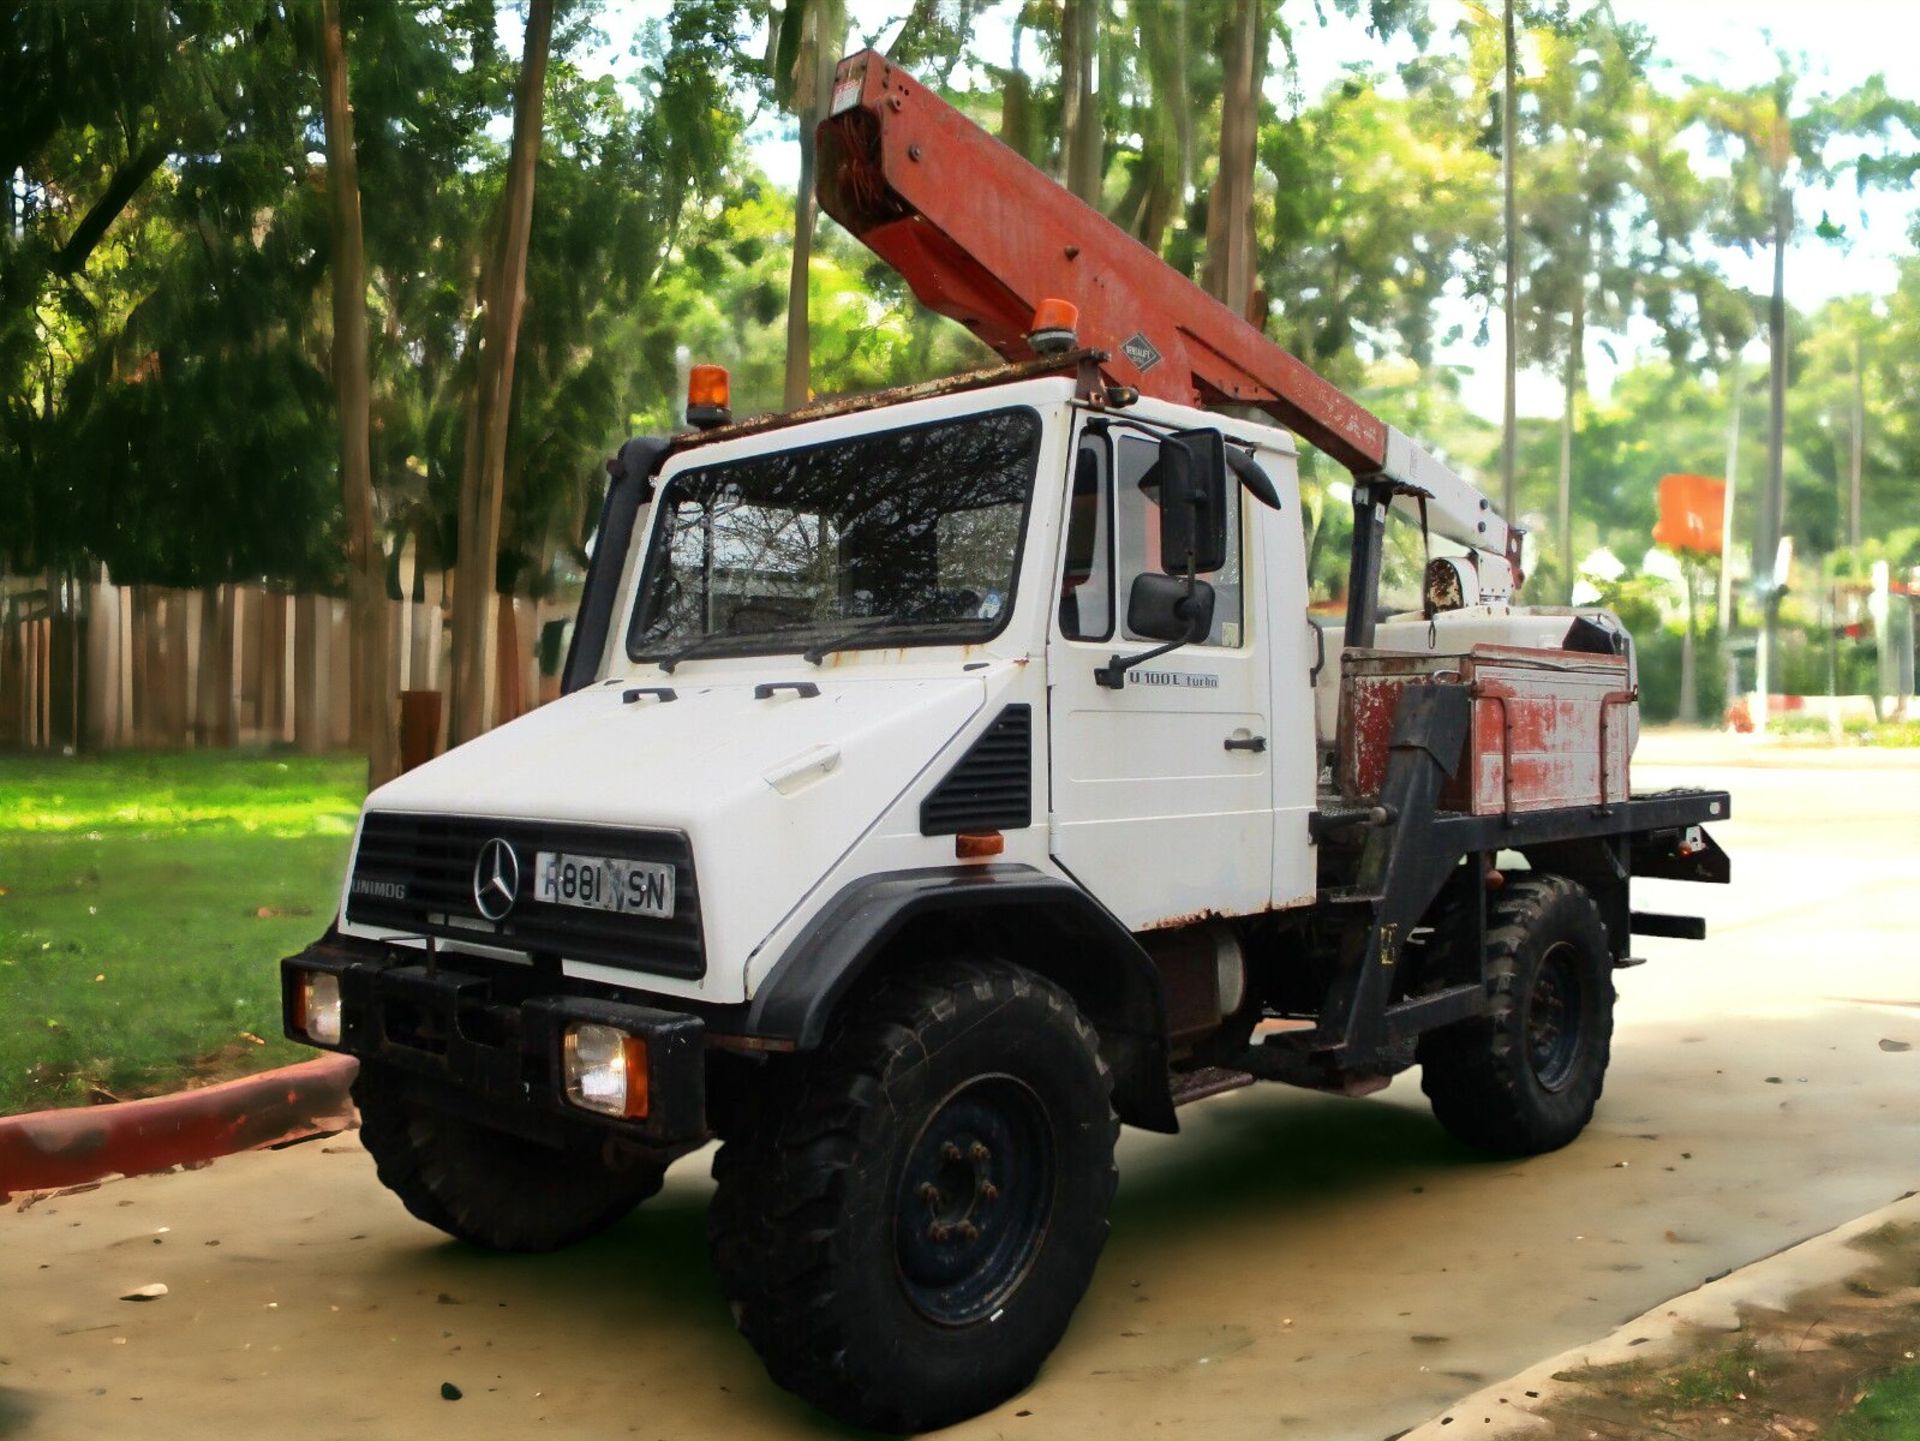 UNIMOG U100L TURBO CHERRY PICKER - REACH NEW HEIGHTS WITH CONFIDENCE! - Image 7 of 23